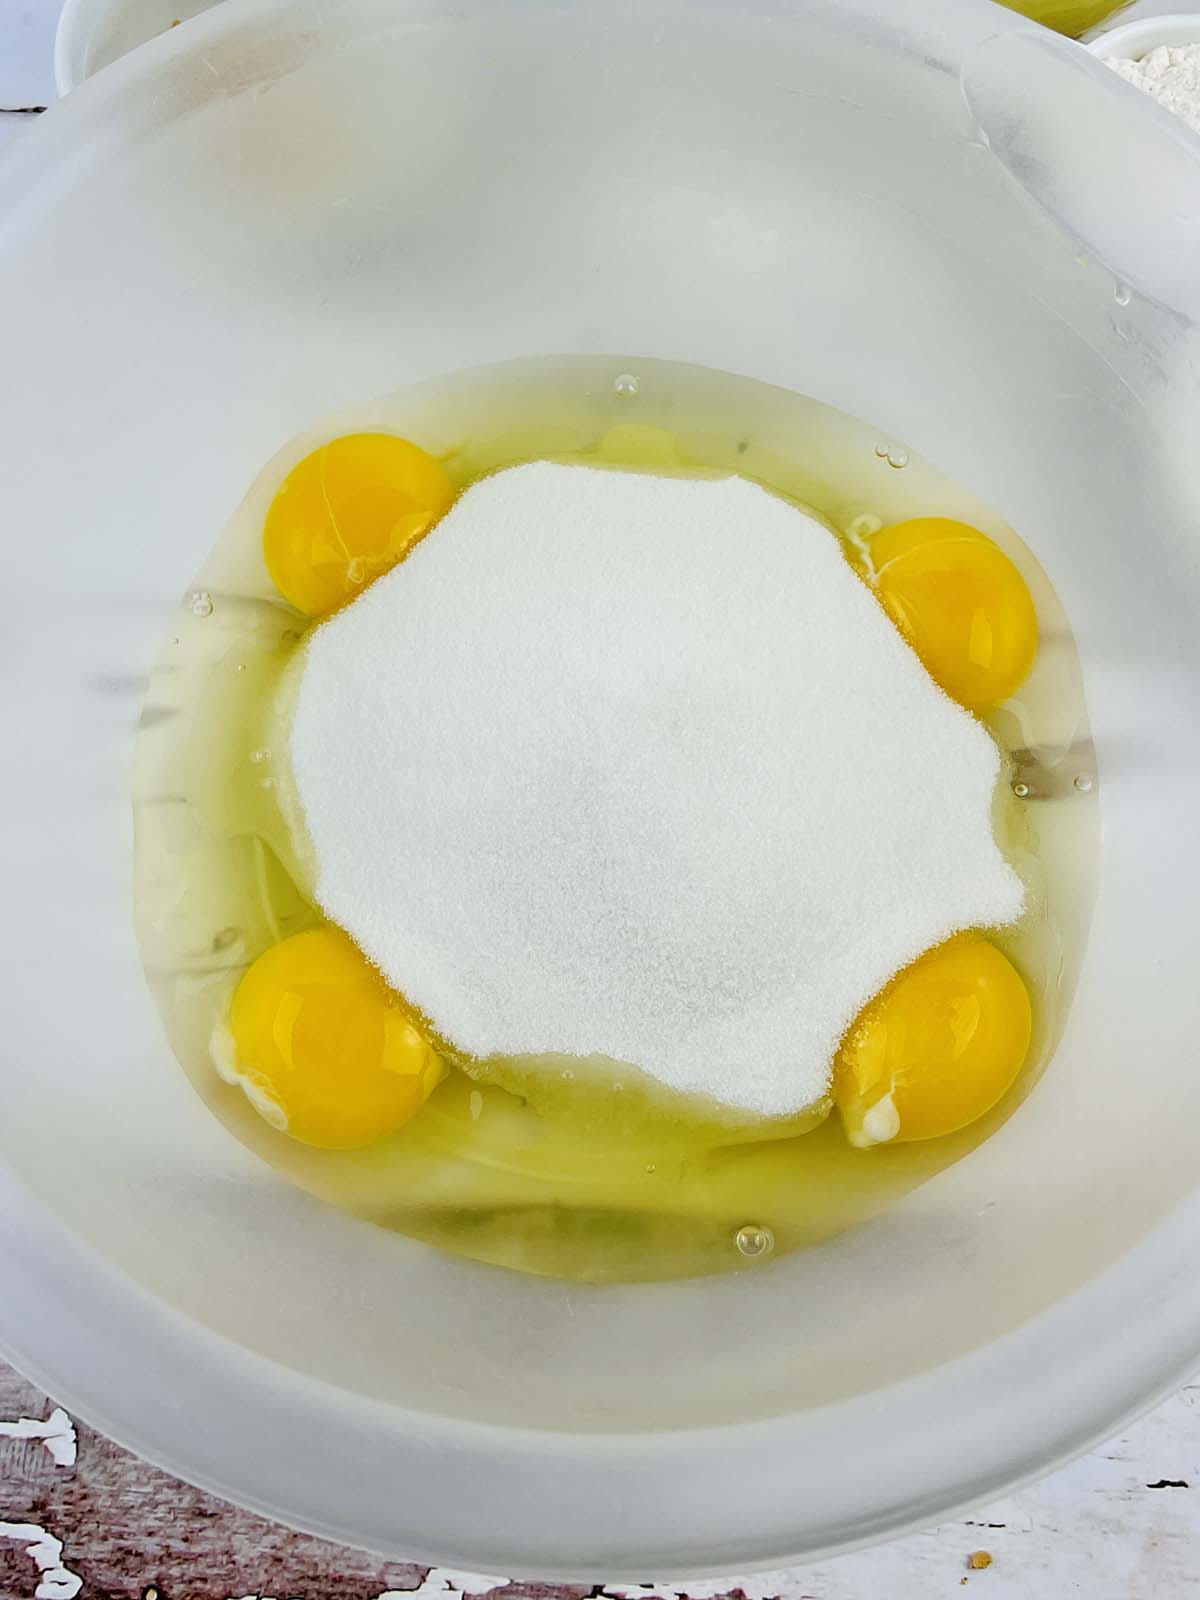 Eggs and sugar in a mixing bowl.